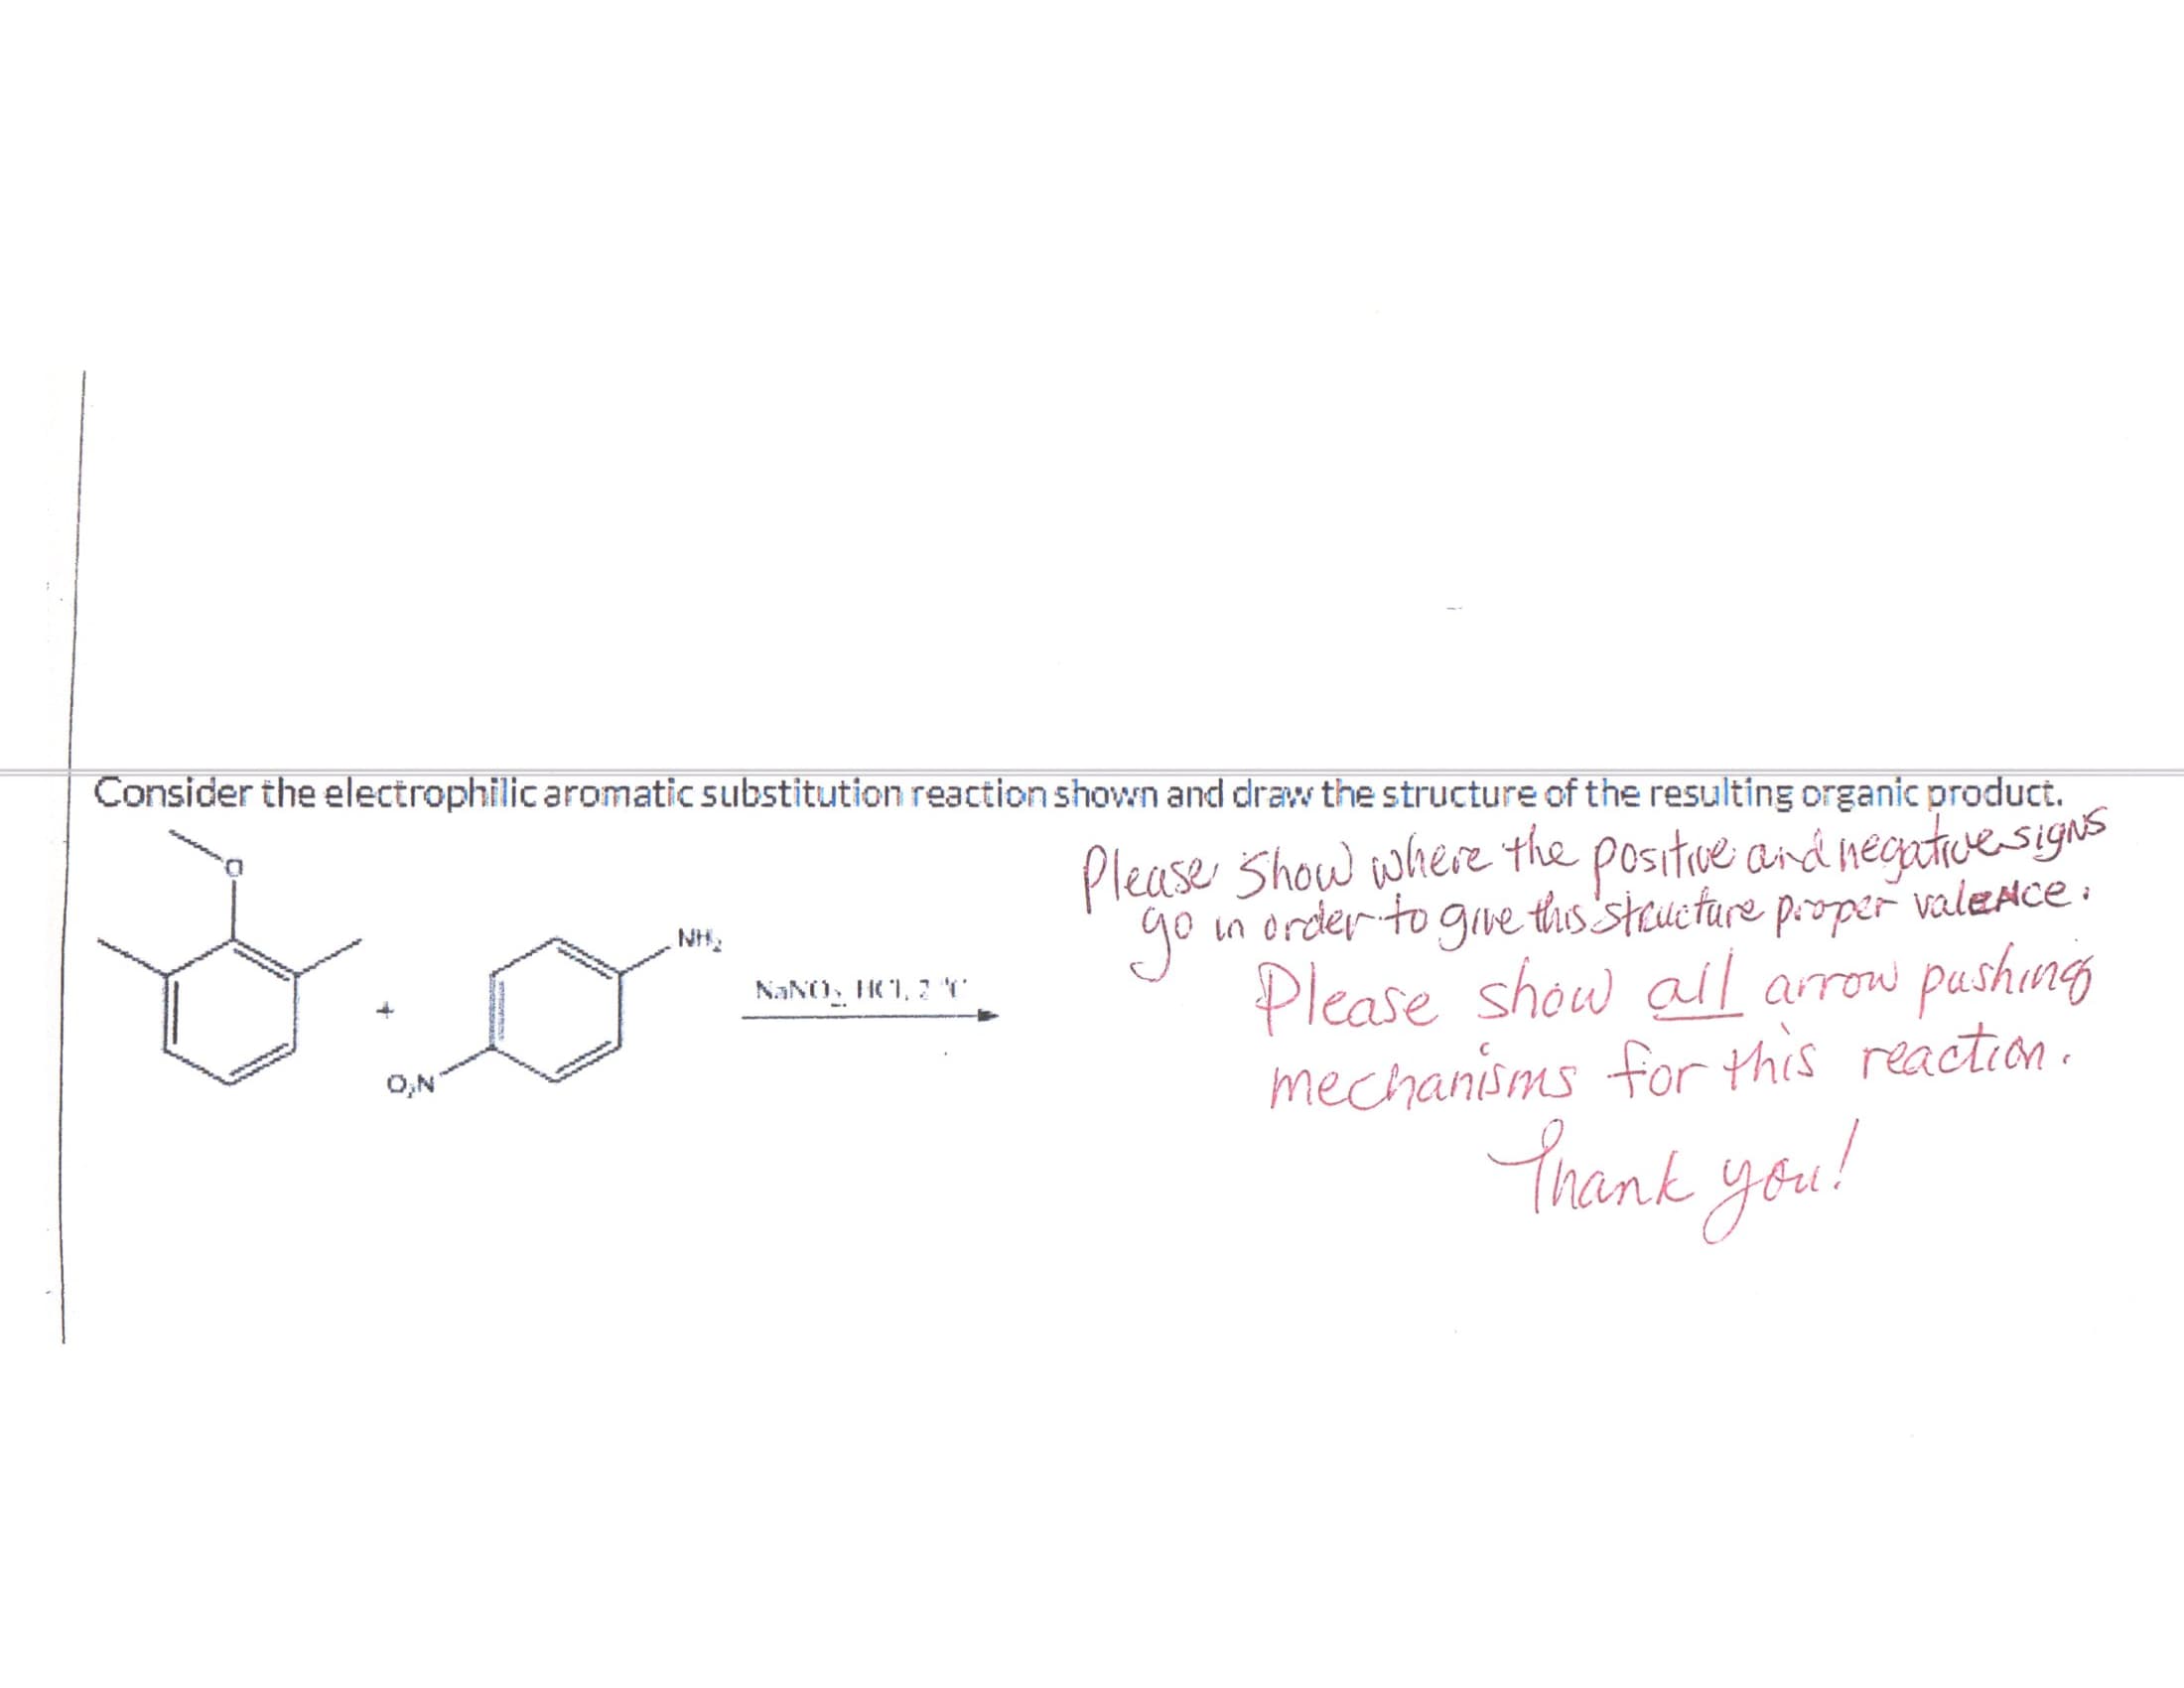 Consider the electrophilicaromatic substitution reaction shown and draw the structure of the resulting organic product.
